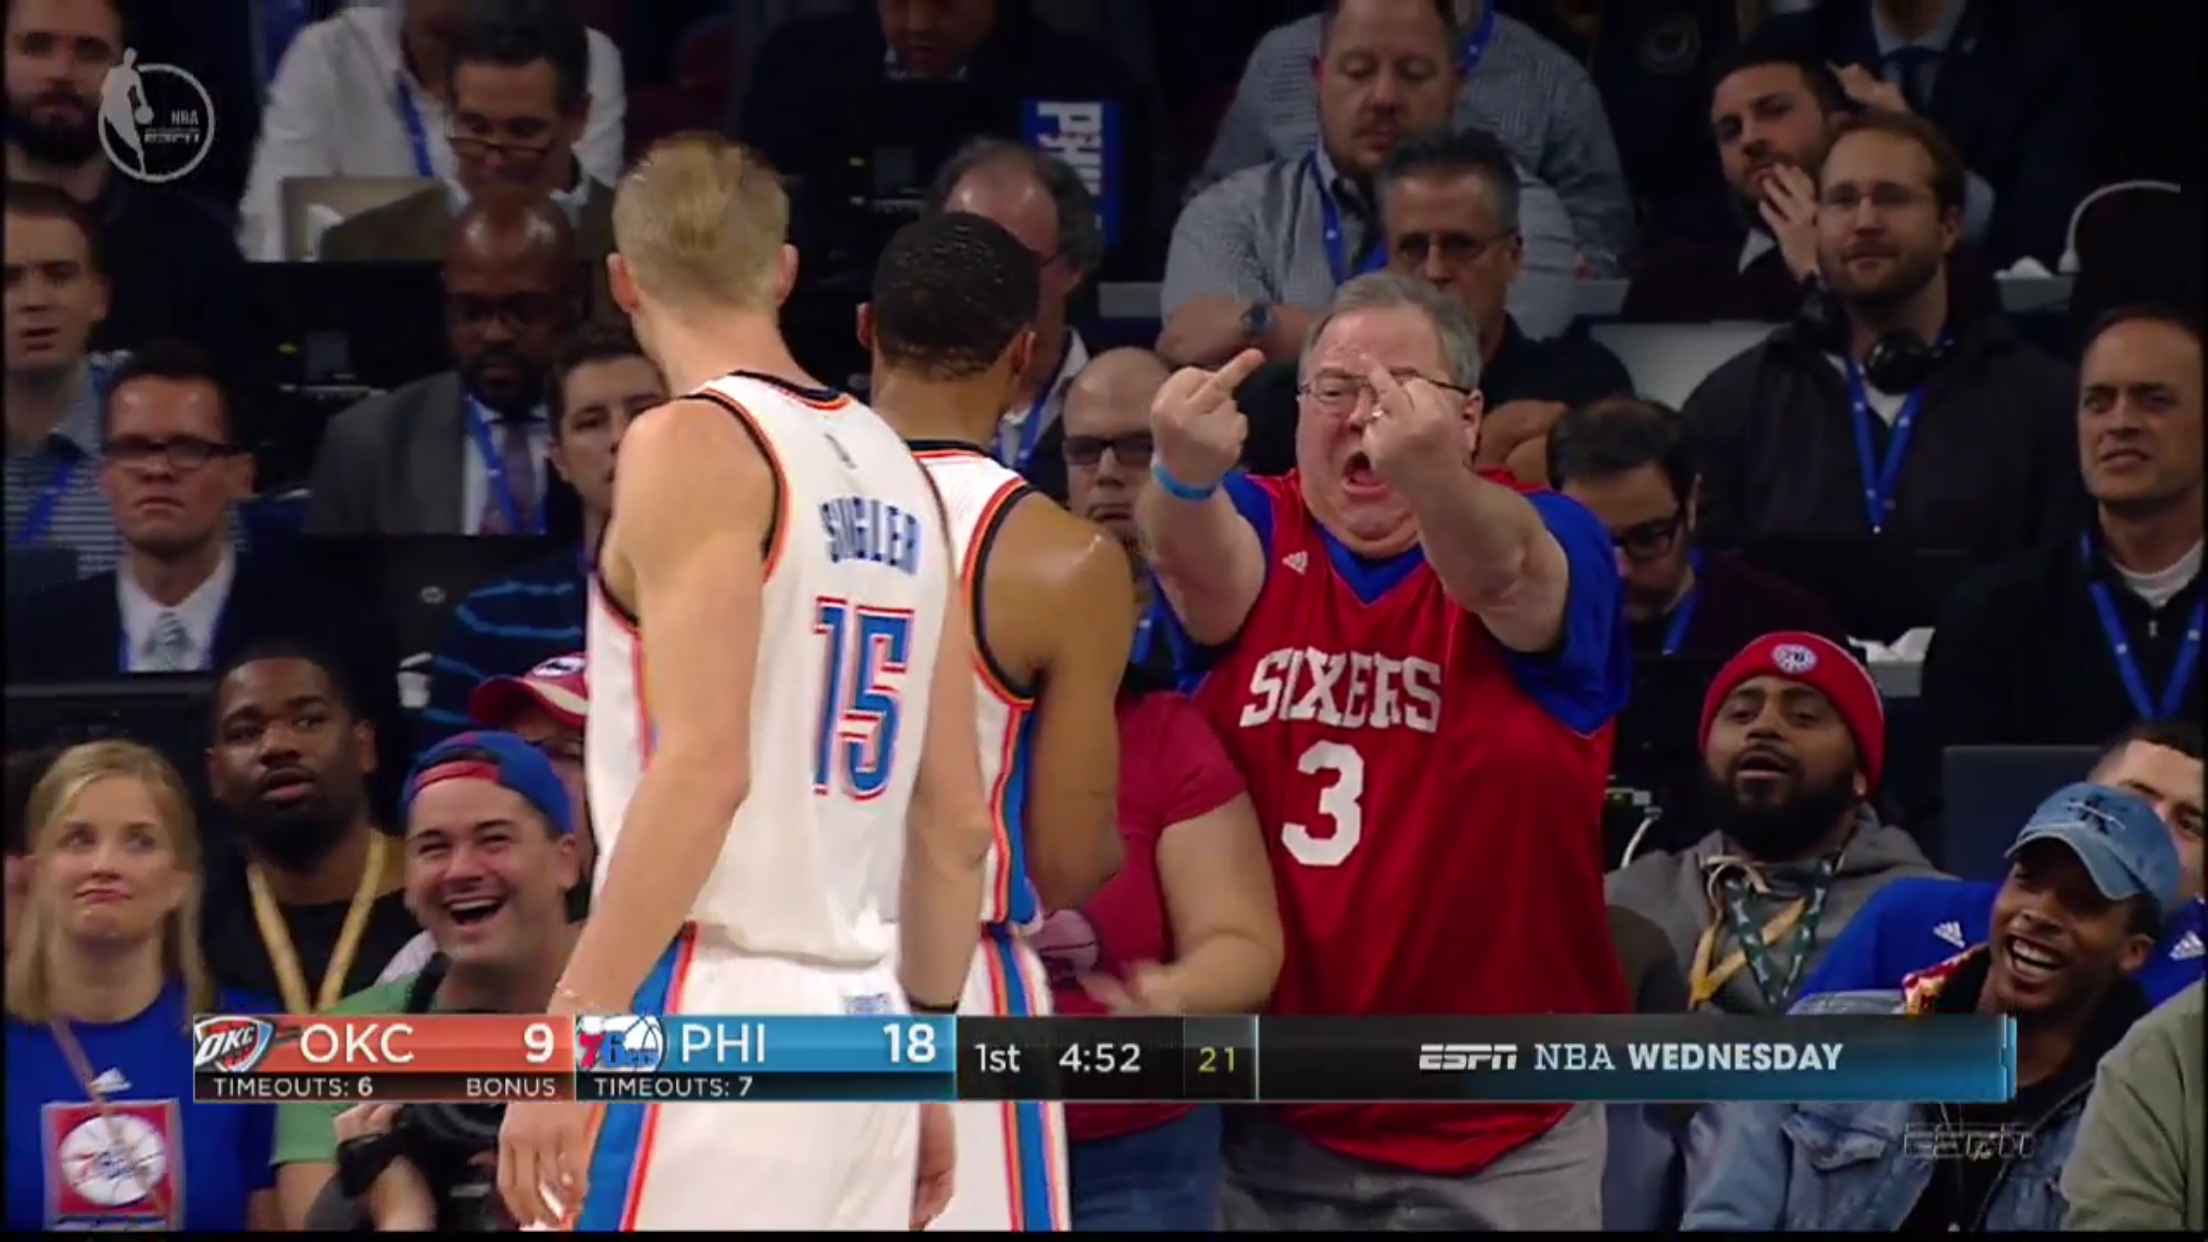 Video: Slovenly Sixers Fan Gives Russell Westbrook The Double Bird